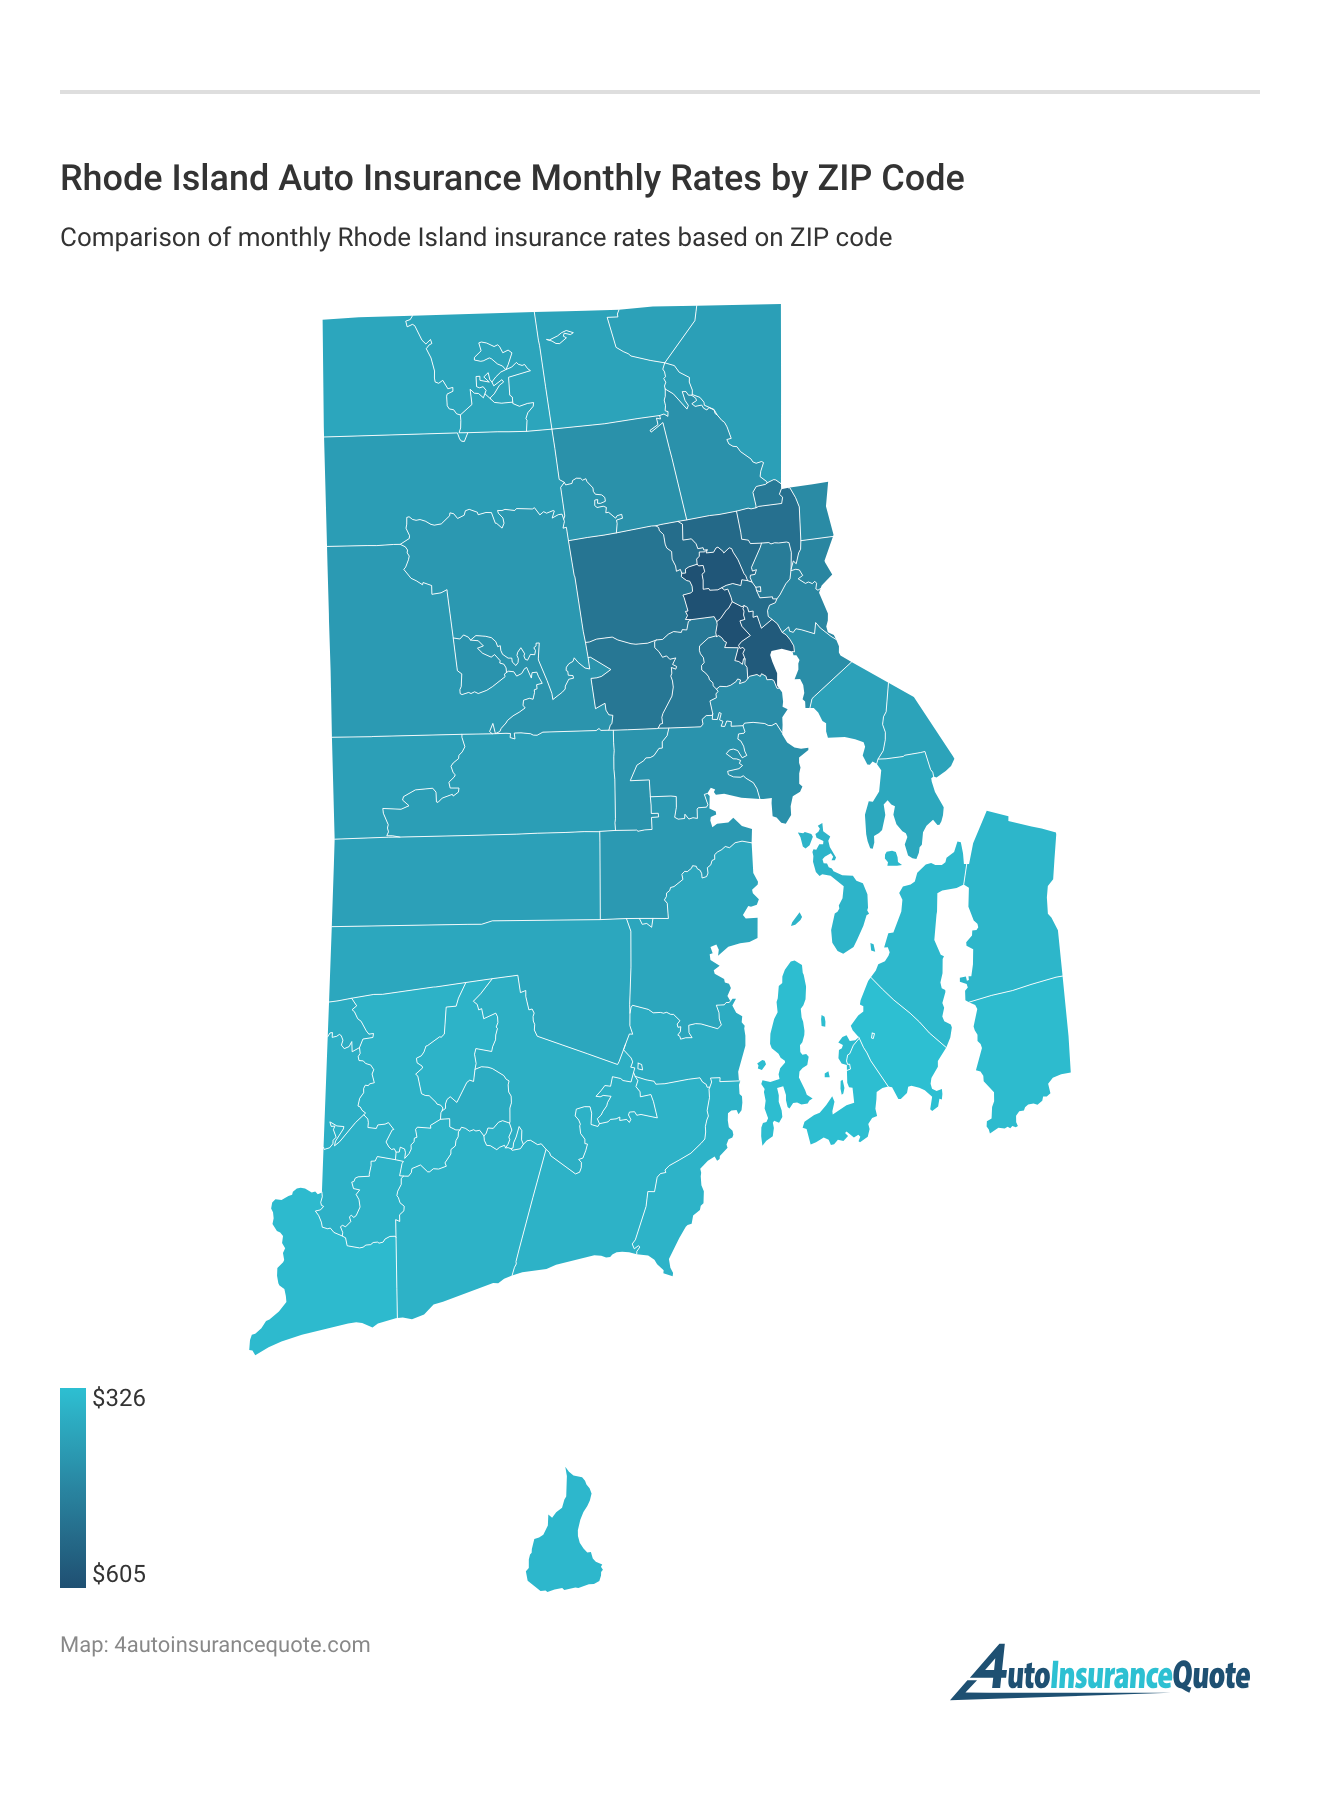 <h3>Rhode Island Auto Insurance Monthly Rates by ZIP Code</h3>